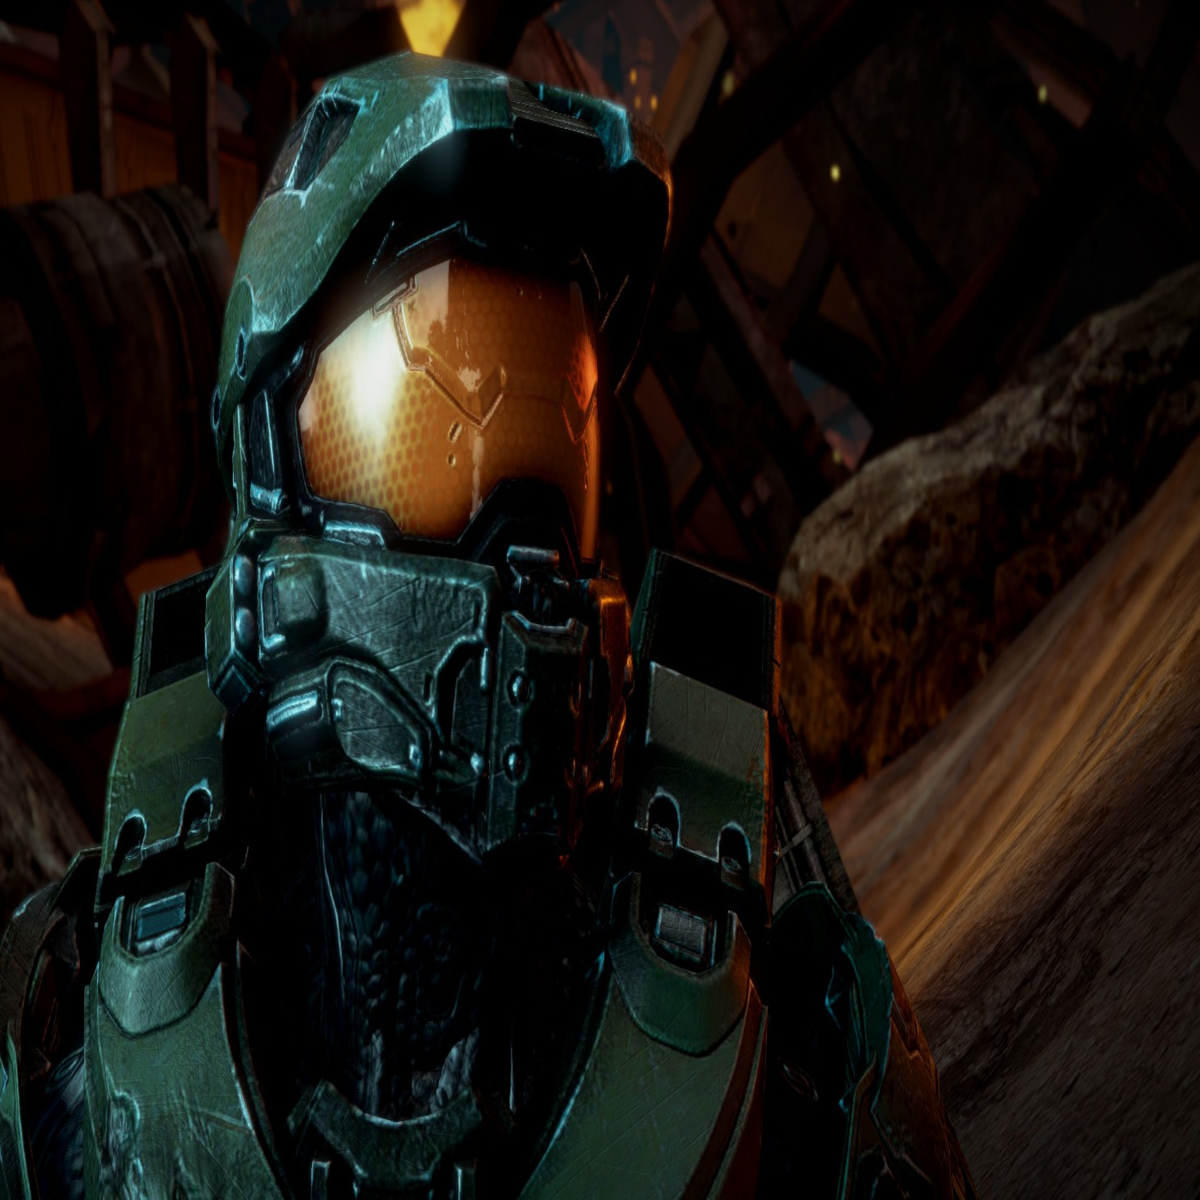 Review: Master Chief returns in stellar 'Halo 4' - The San Diego